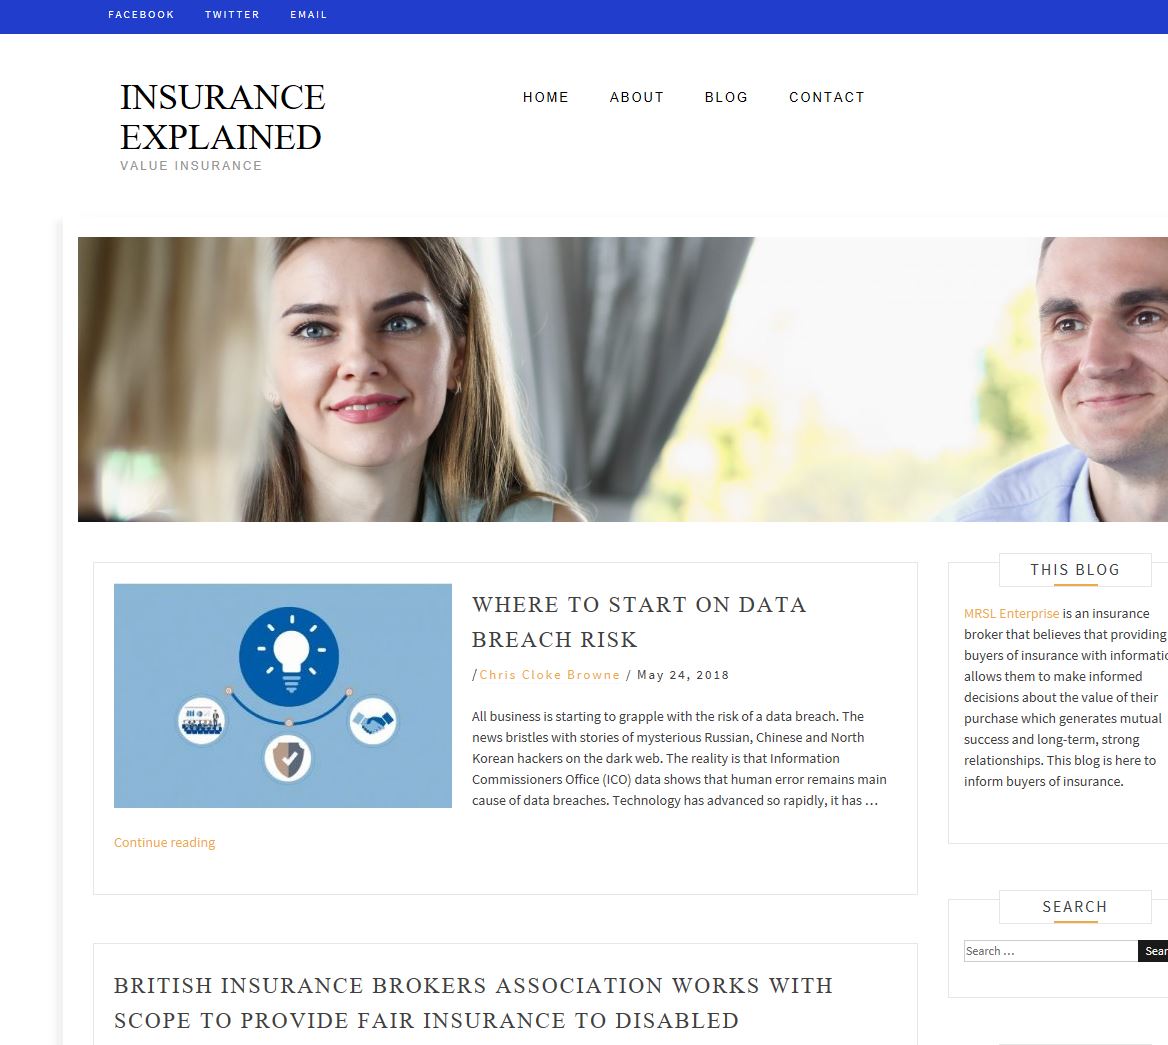 Do you feel let down by your #insurance ? The #InsuranceExplained blog is here to help you to understand and #ValueInsurance

mrslenterpriseblog.bravepartners.com/wordpress/?pag…